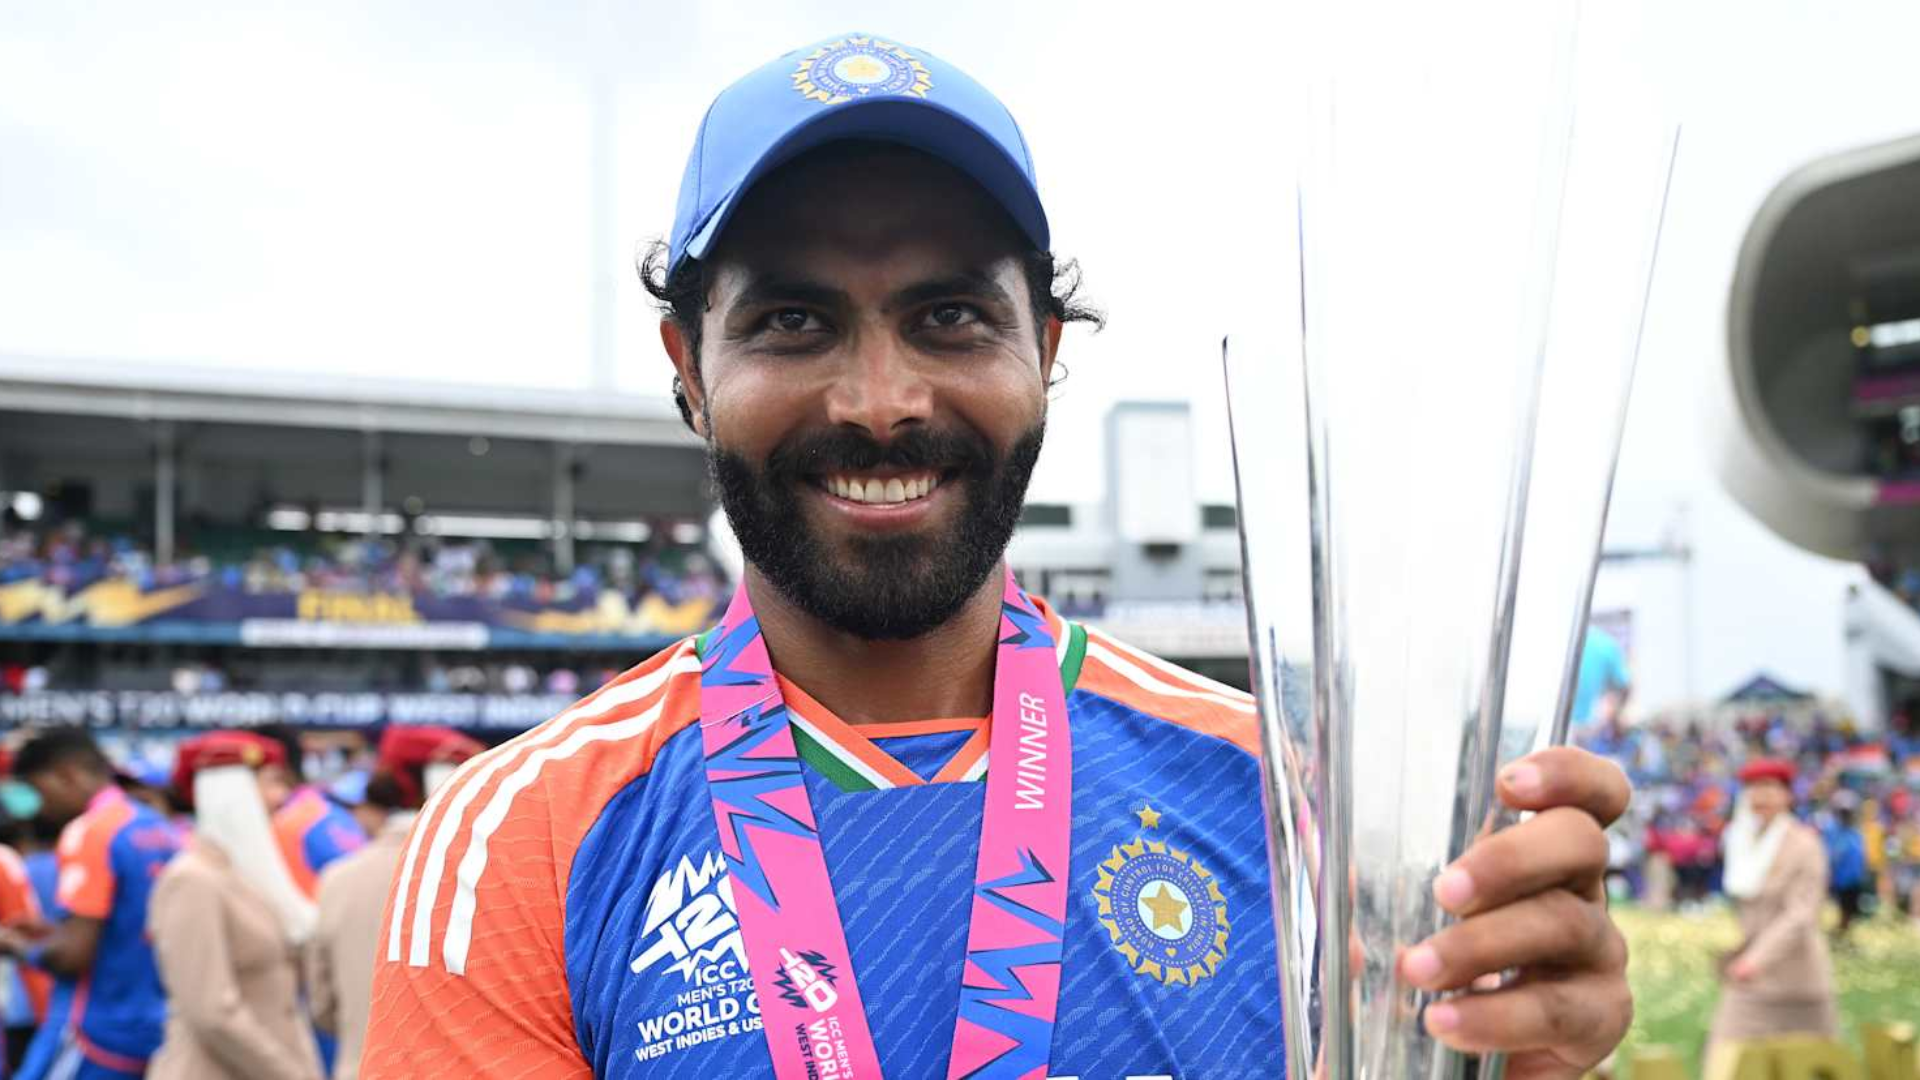 In his announcement, he expressed deep gratitude to his teammates, coaches, and fans, while confirming his continued involvement in other formats of cricket.